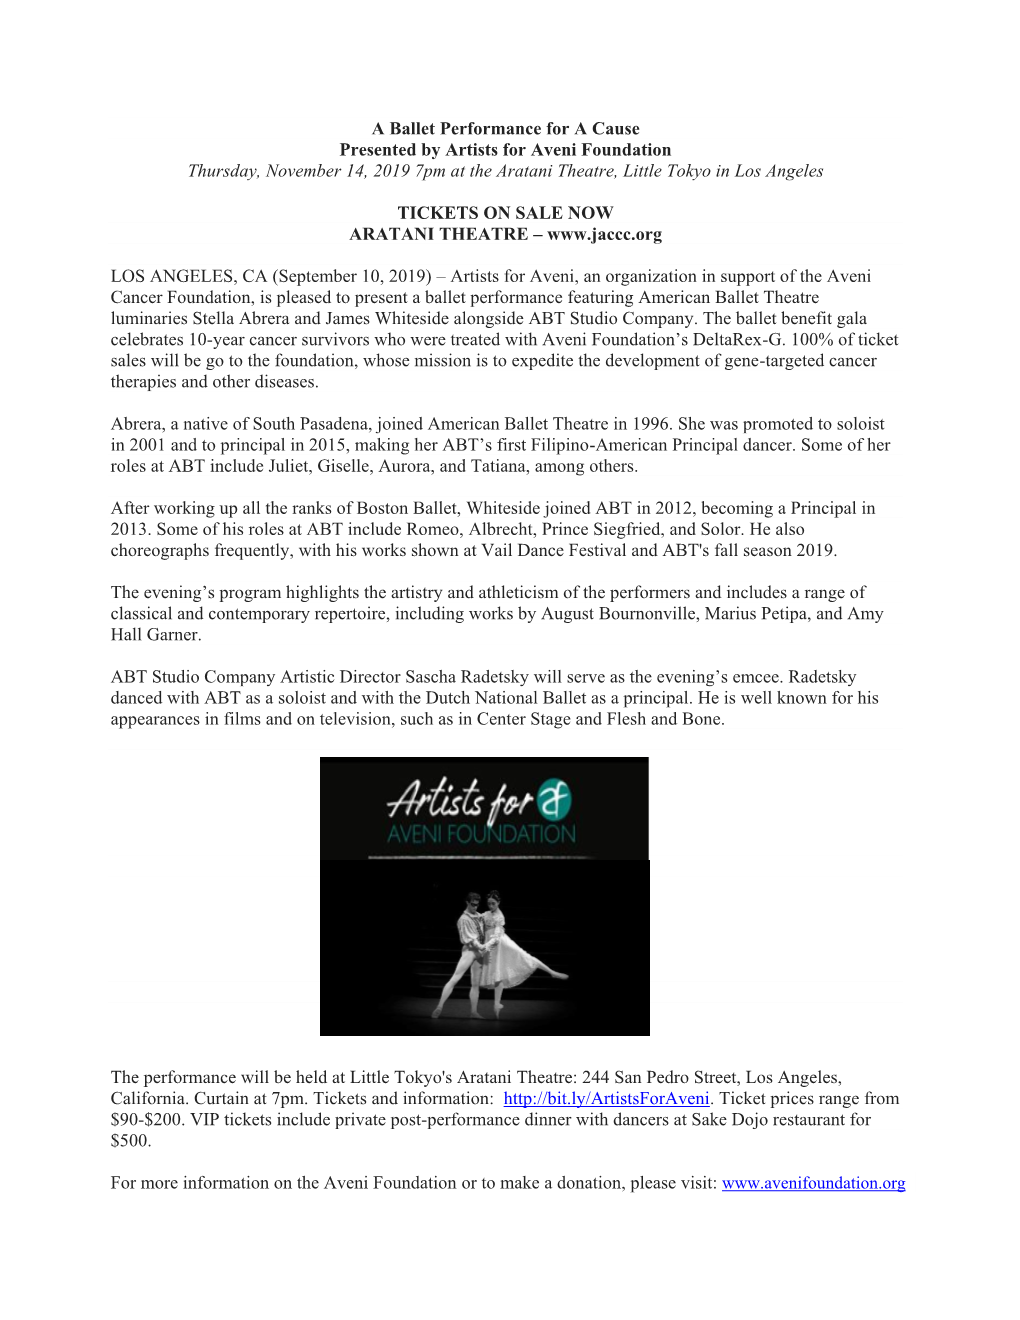 A Ballet Performance for a Cause Presented by Artists for Aveni Foundation Thursday, November 14, 2019 7Pm at the Aratani Theatre, Little Tokyo in Los Angeles